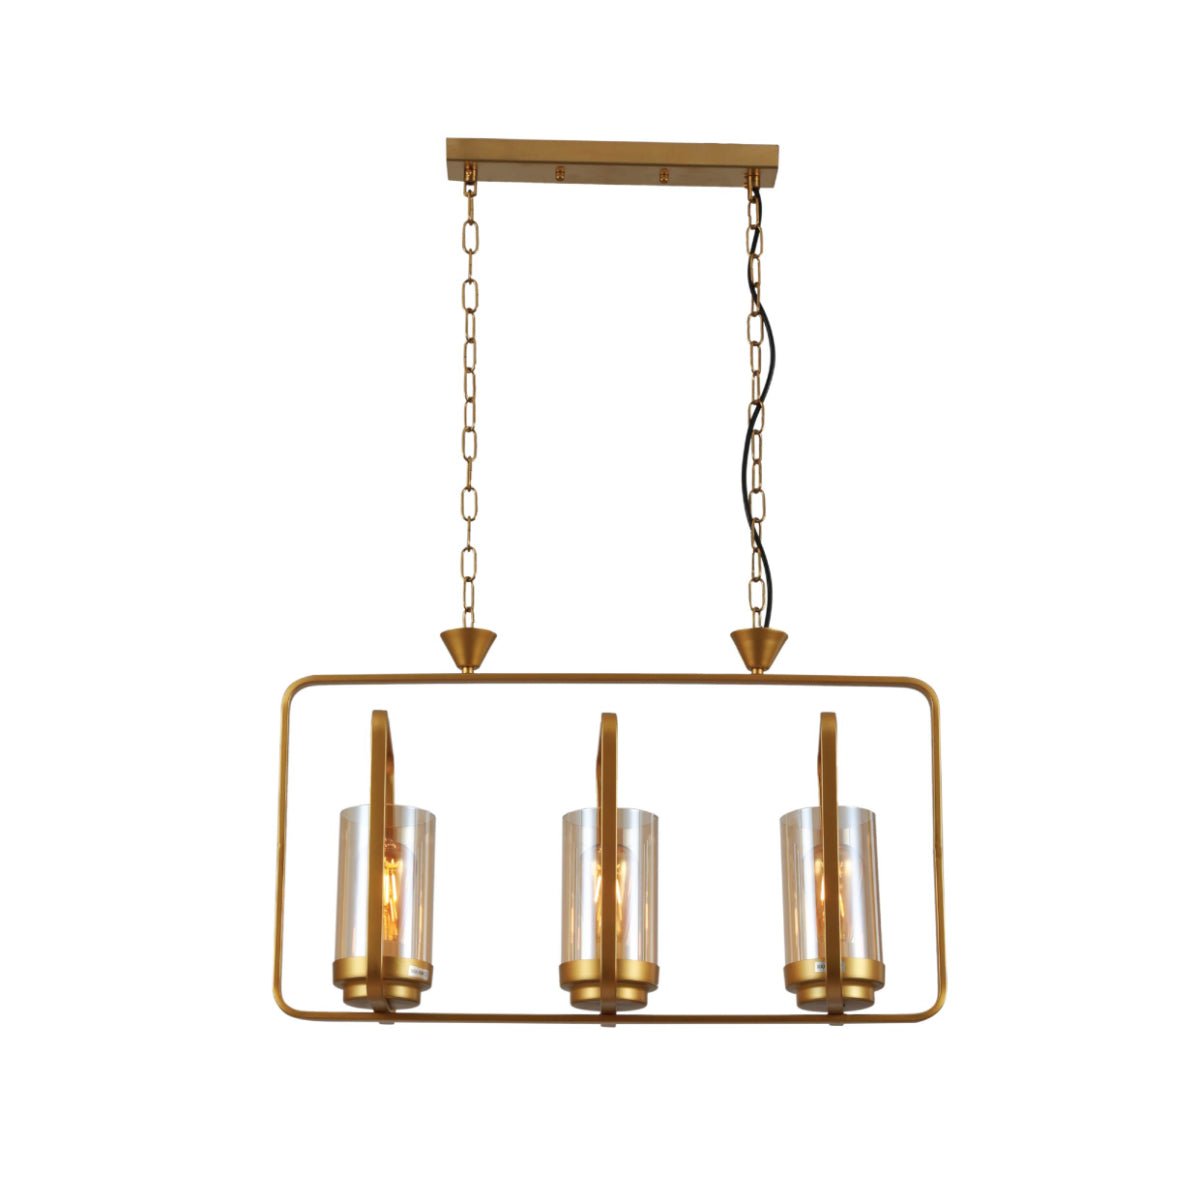 Main image of Gold Metal Cage Body Amber Cylinder Glass Kitchen Island Chandelier Ceiling Light with 3xE27 Fitting | TEKLED 159-17444